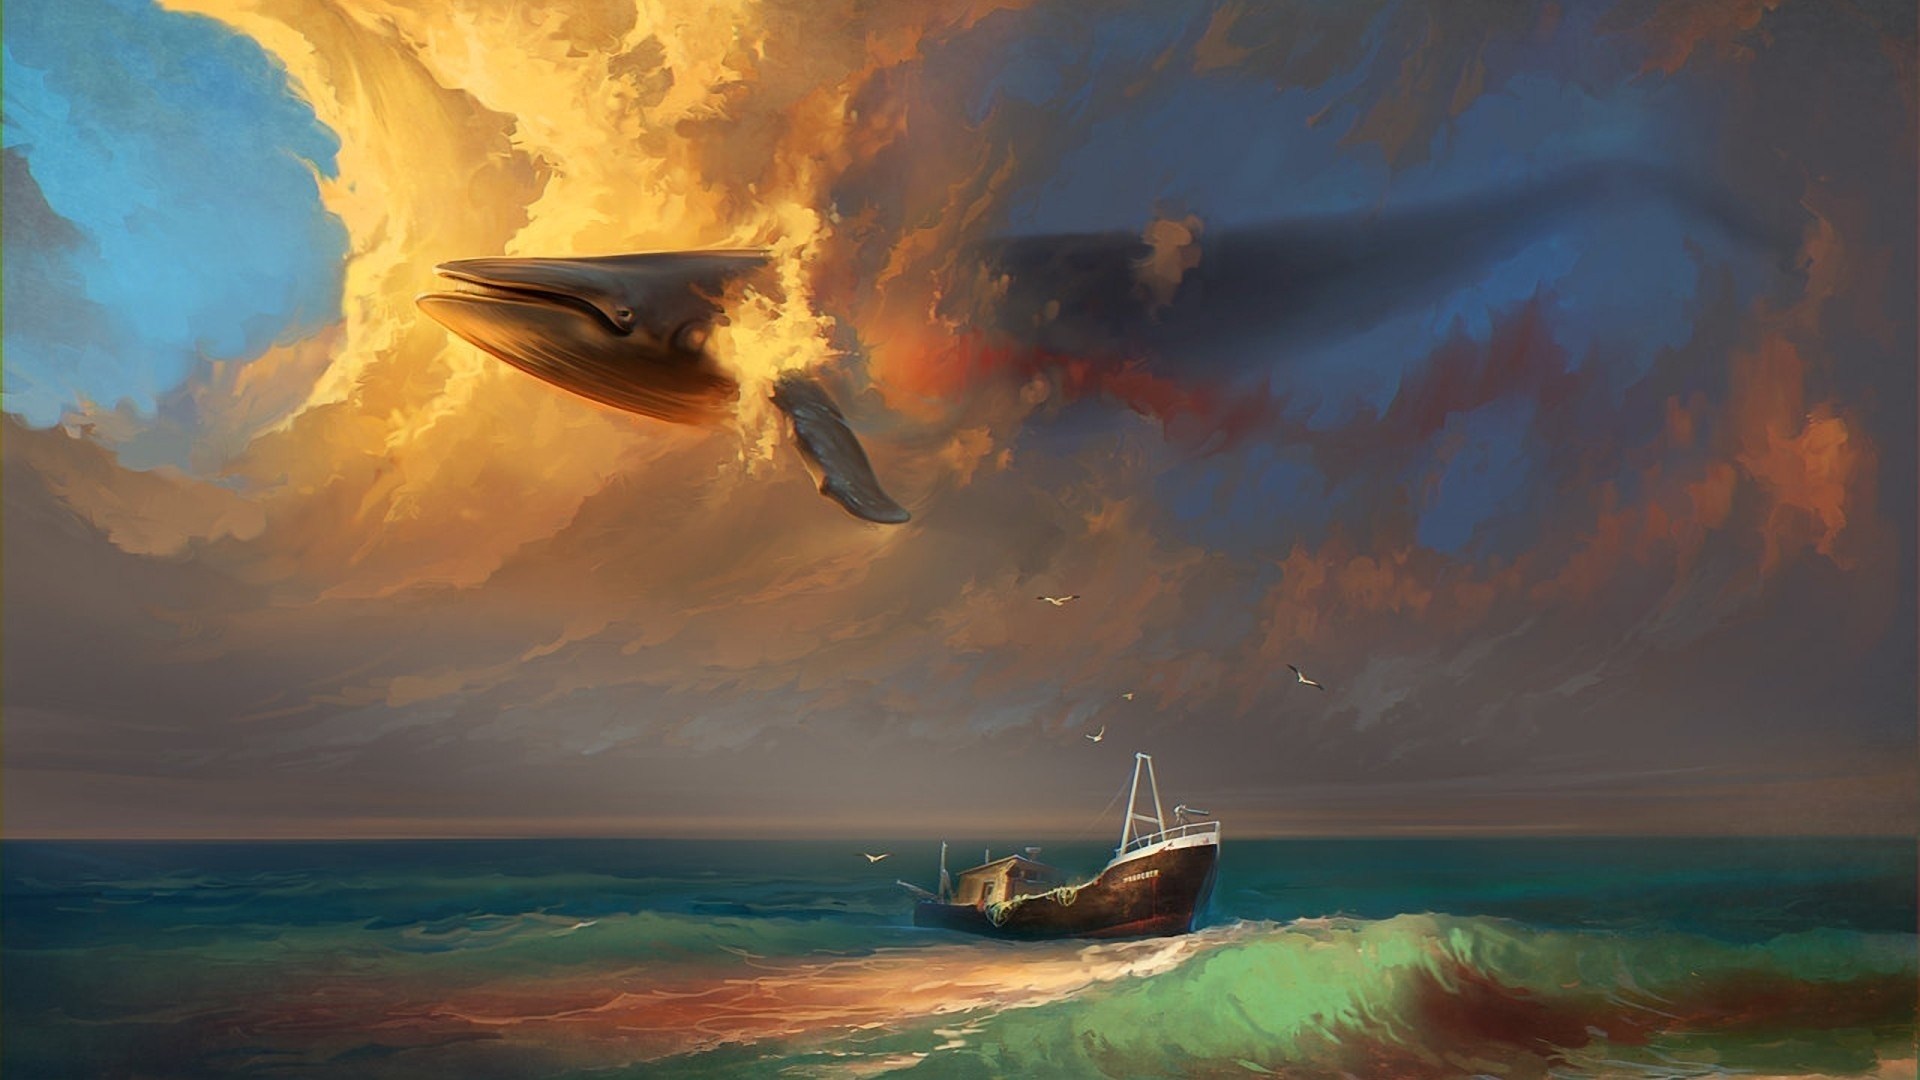 Ship Birds Whale Clouds Painting Wallpaper Magic4walls